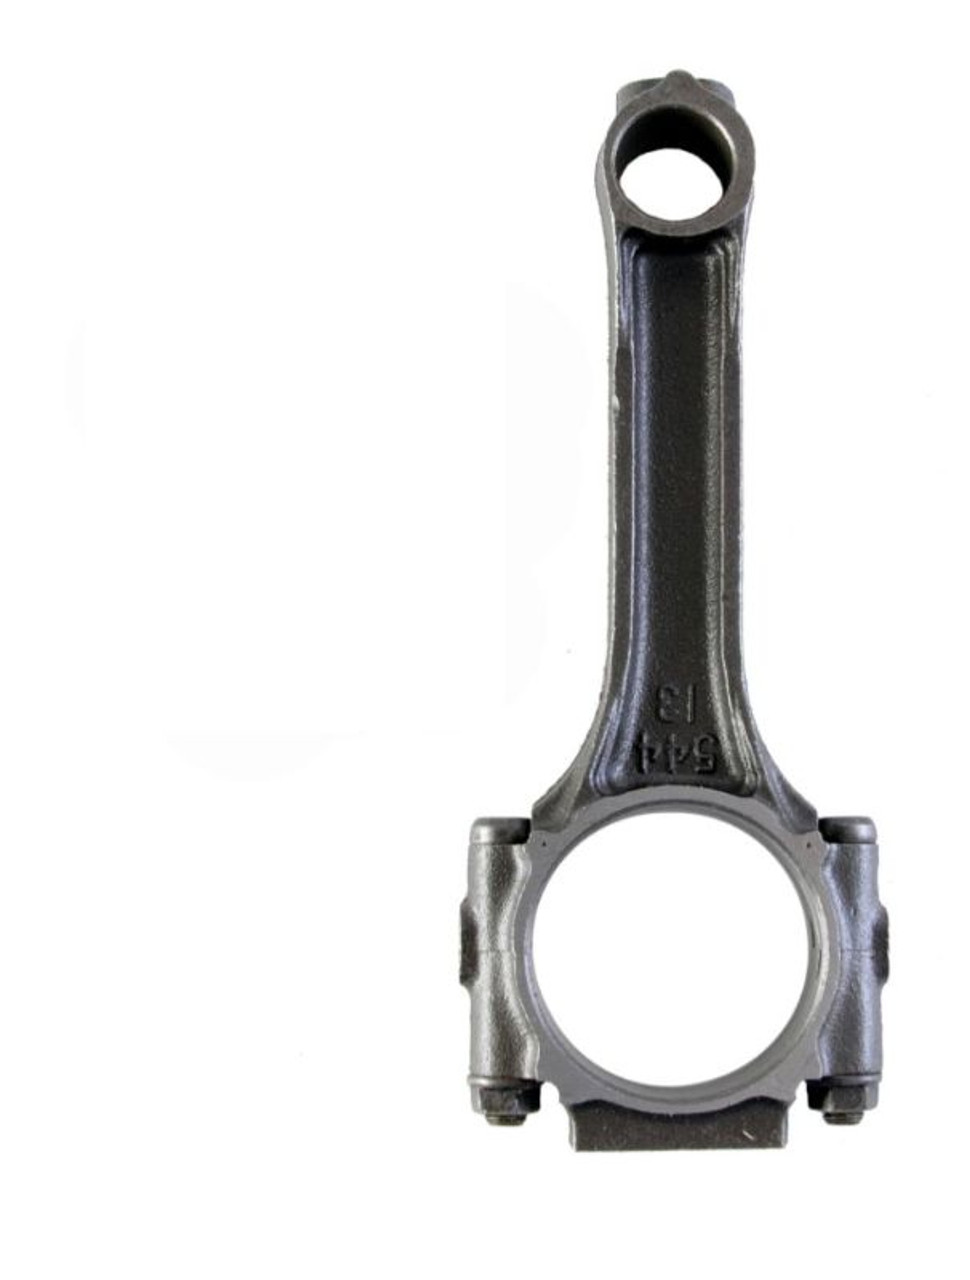 2000 Jeep Cherokee 4.0L Engine Connecting Rod ECR108 -96